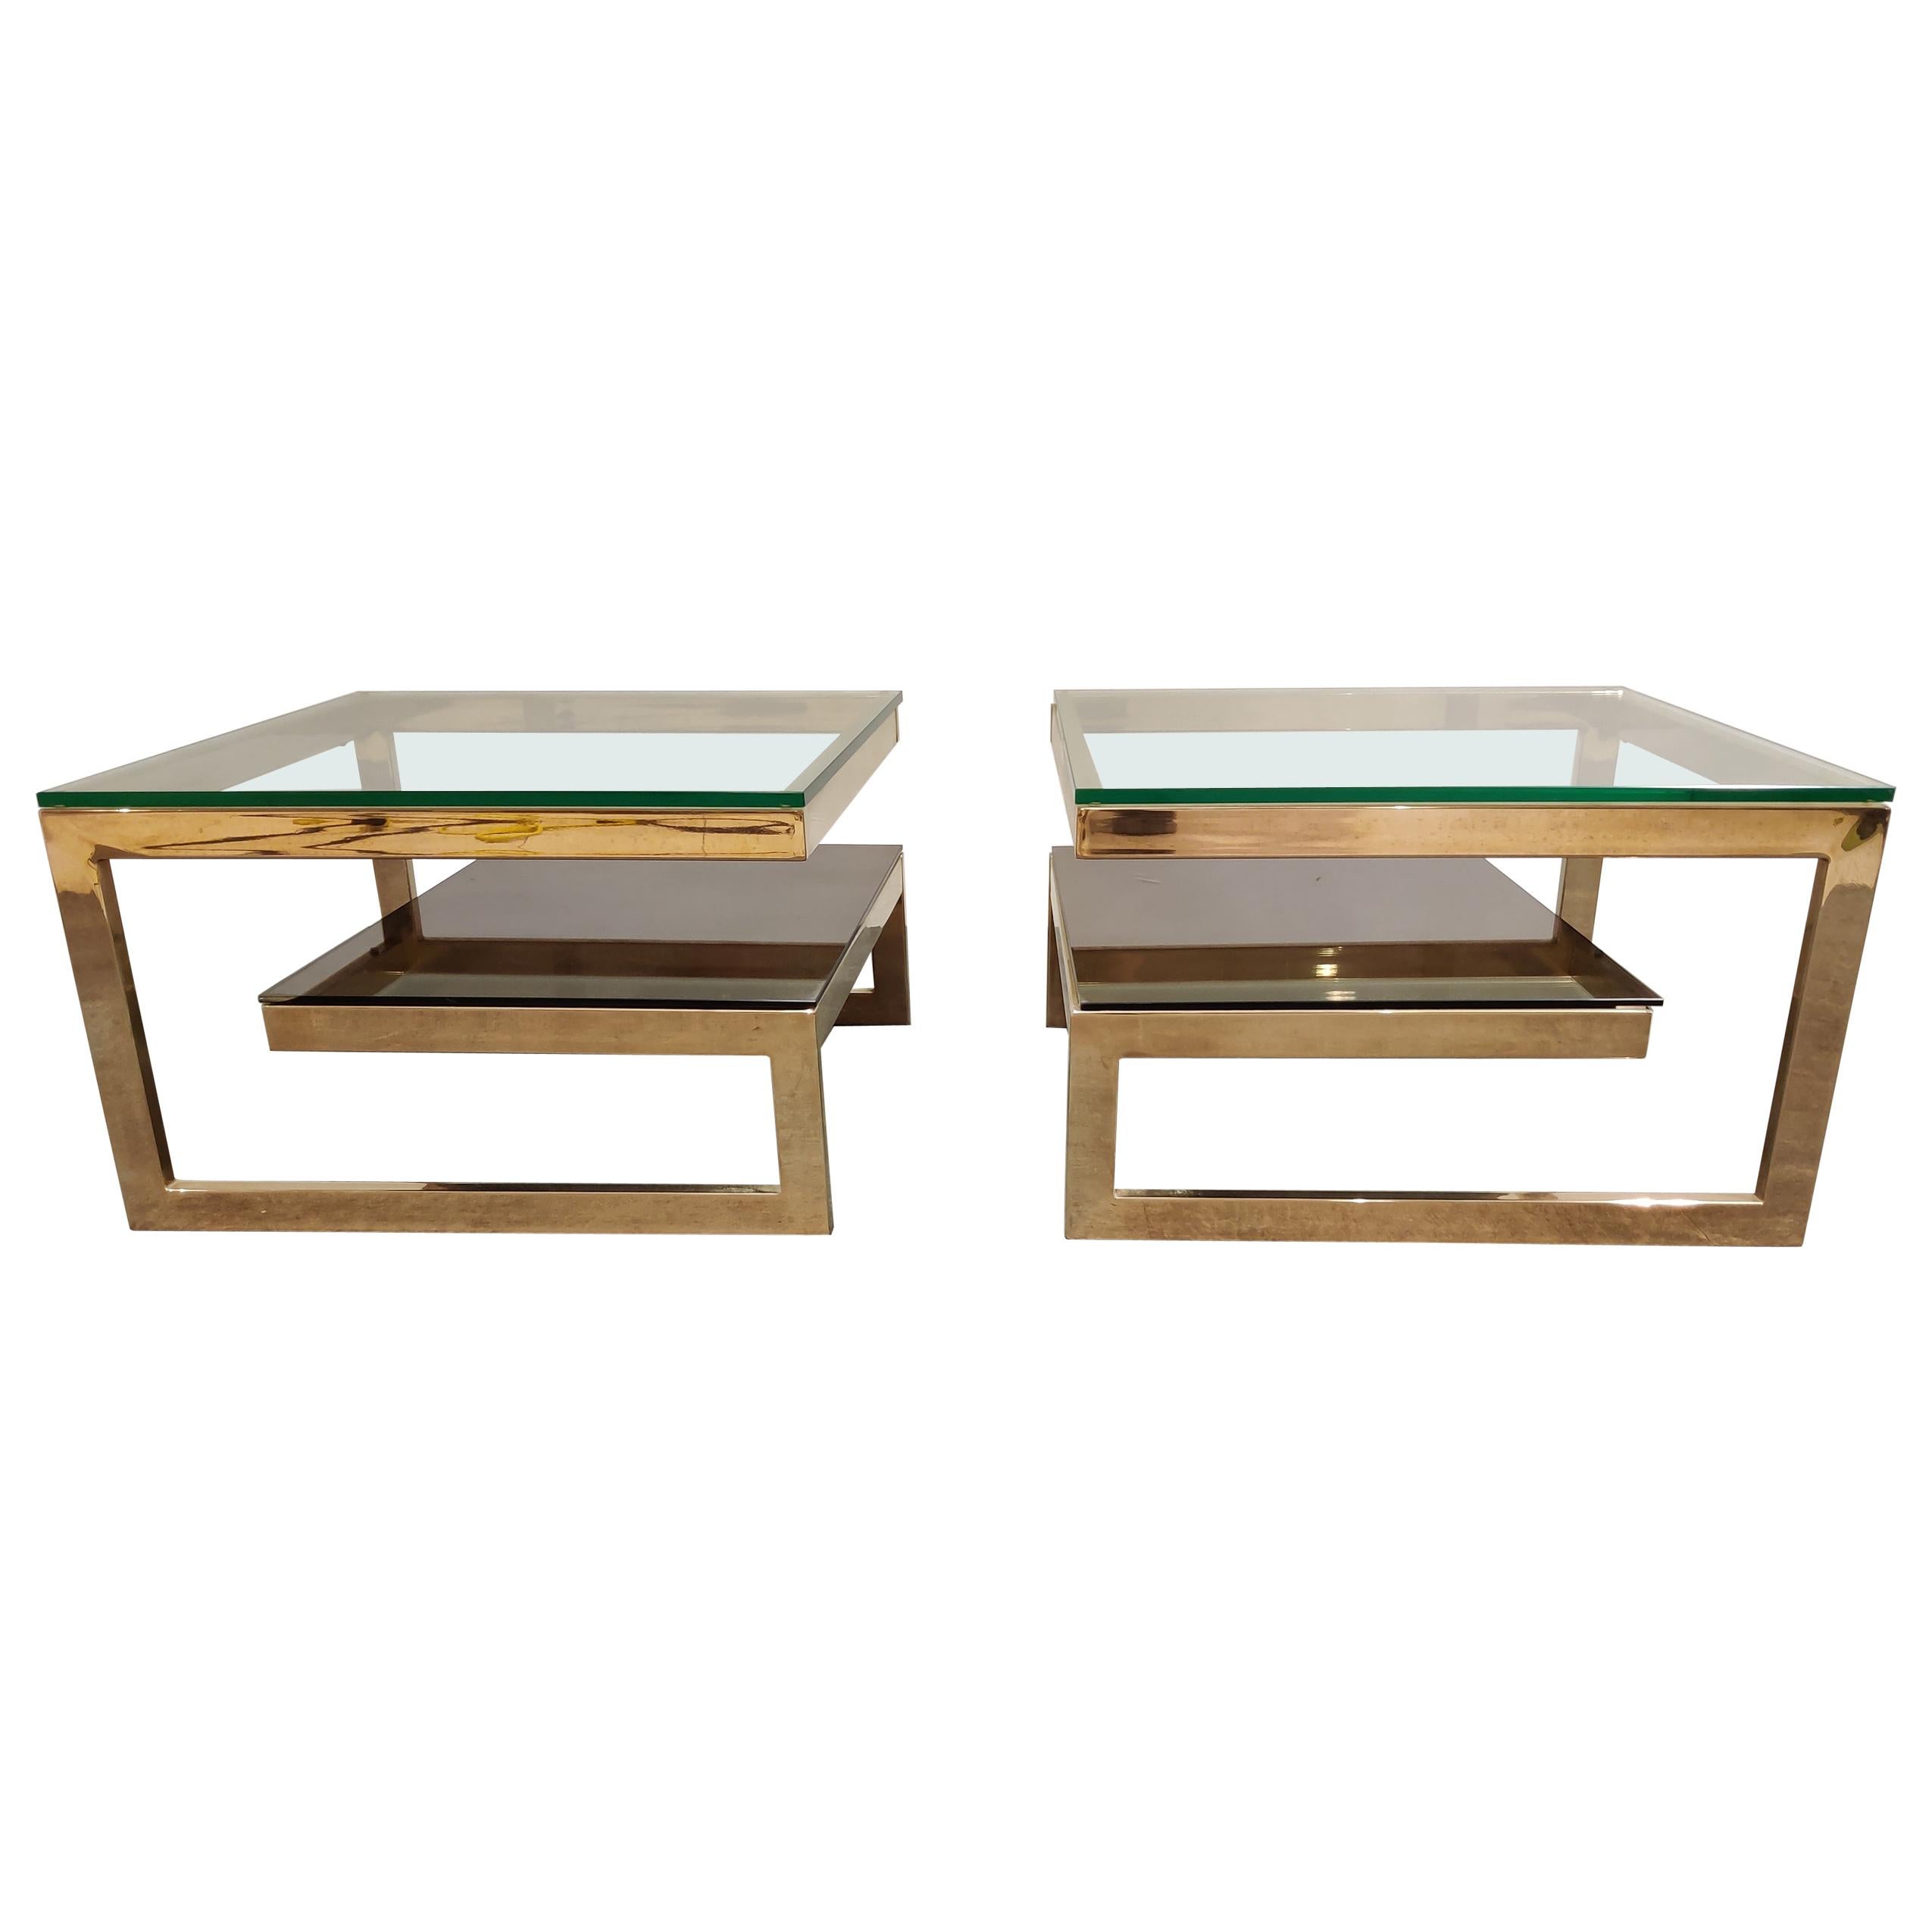 Pair of 23-karat gold layered 'G'-shaped side tables produced by Belgochrom.

The tables have clear and mirrored glass tops.

Good condition, original glass.

1970s, Belgium

Measures: Height 37cm/14.56